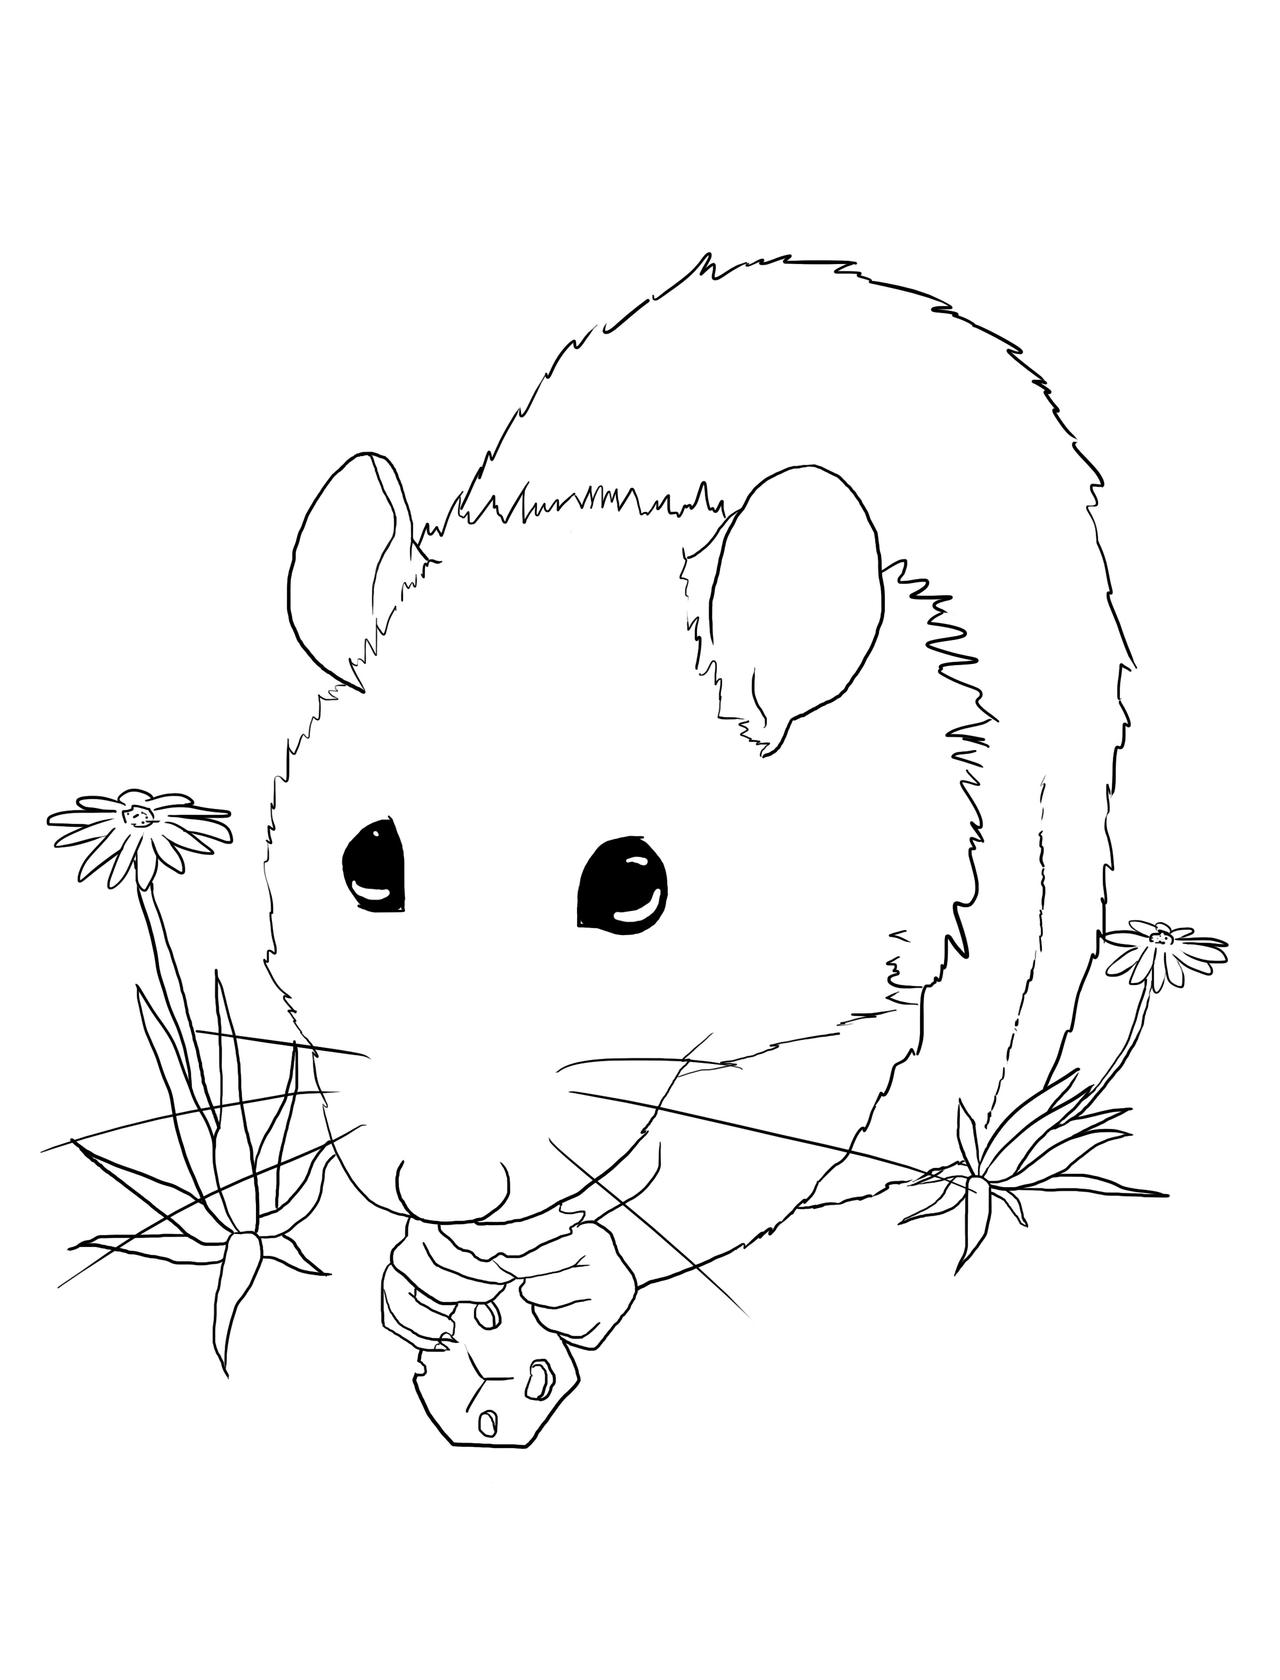 Rat coloring page by starlightabyss on